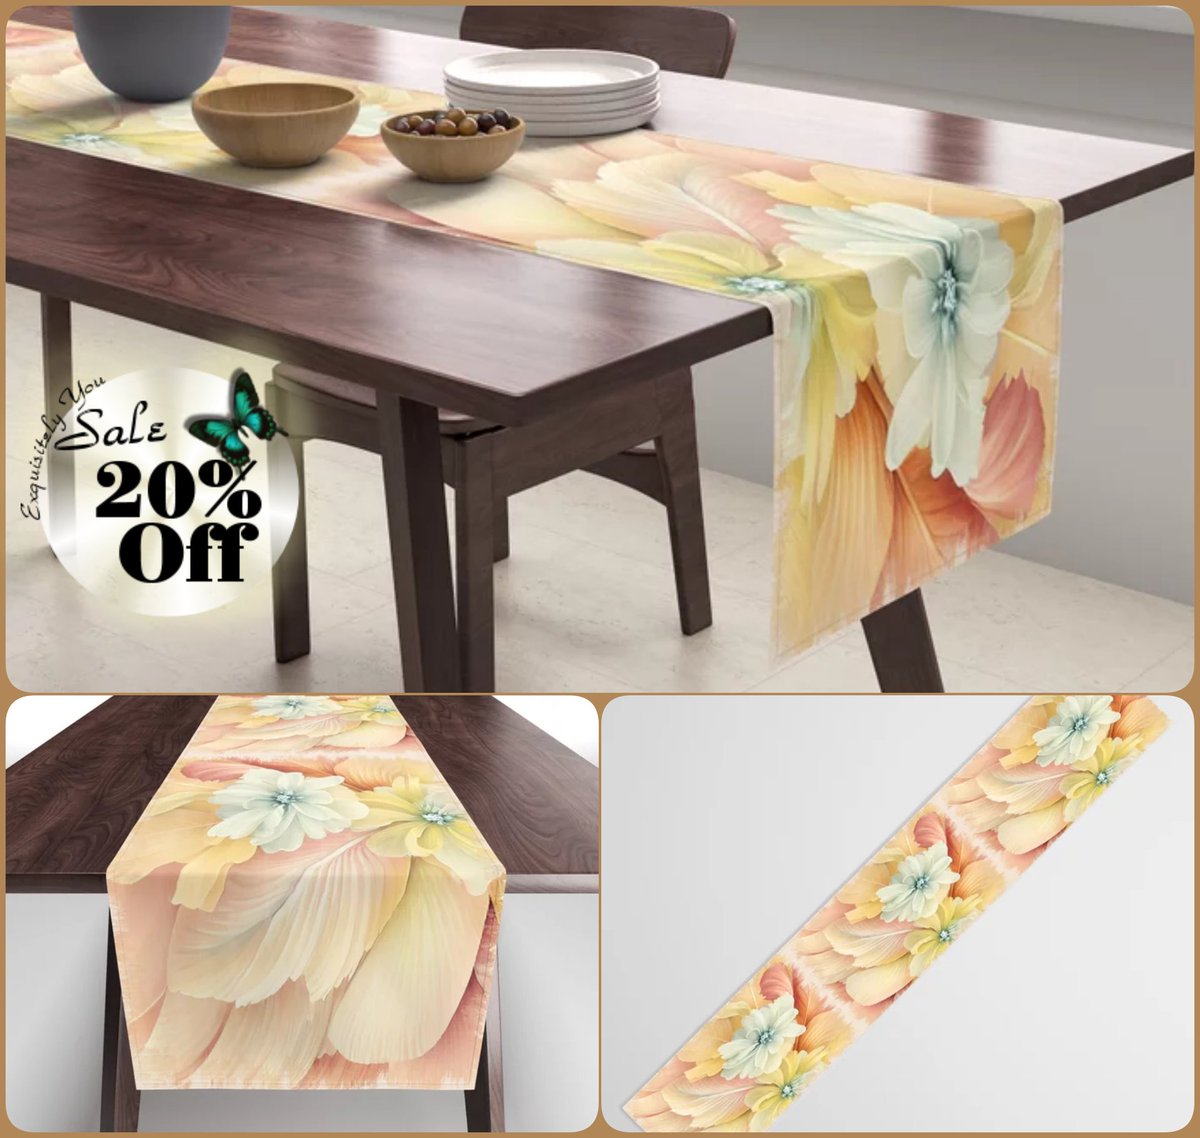 *SALE 20% Off*
Orange Floweret Table Runner~Art Exquisite!~
#coasters #gifts #trays #mugs #coffee #society6 #travel #coolers #artfalaxy #art #accents #modern #trendy #wine #water #interior #placemats #tablecloths #runners

society6.com/product/orange…